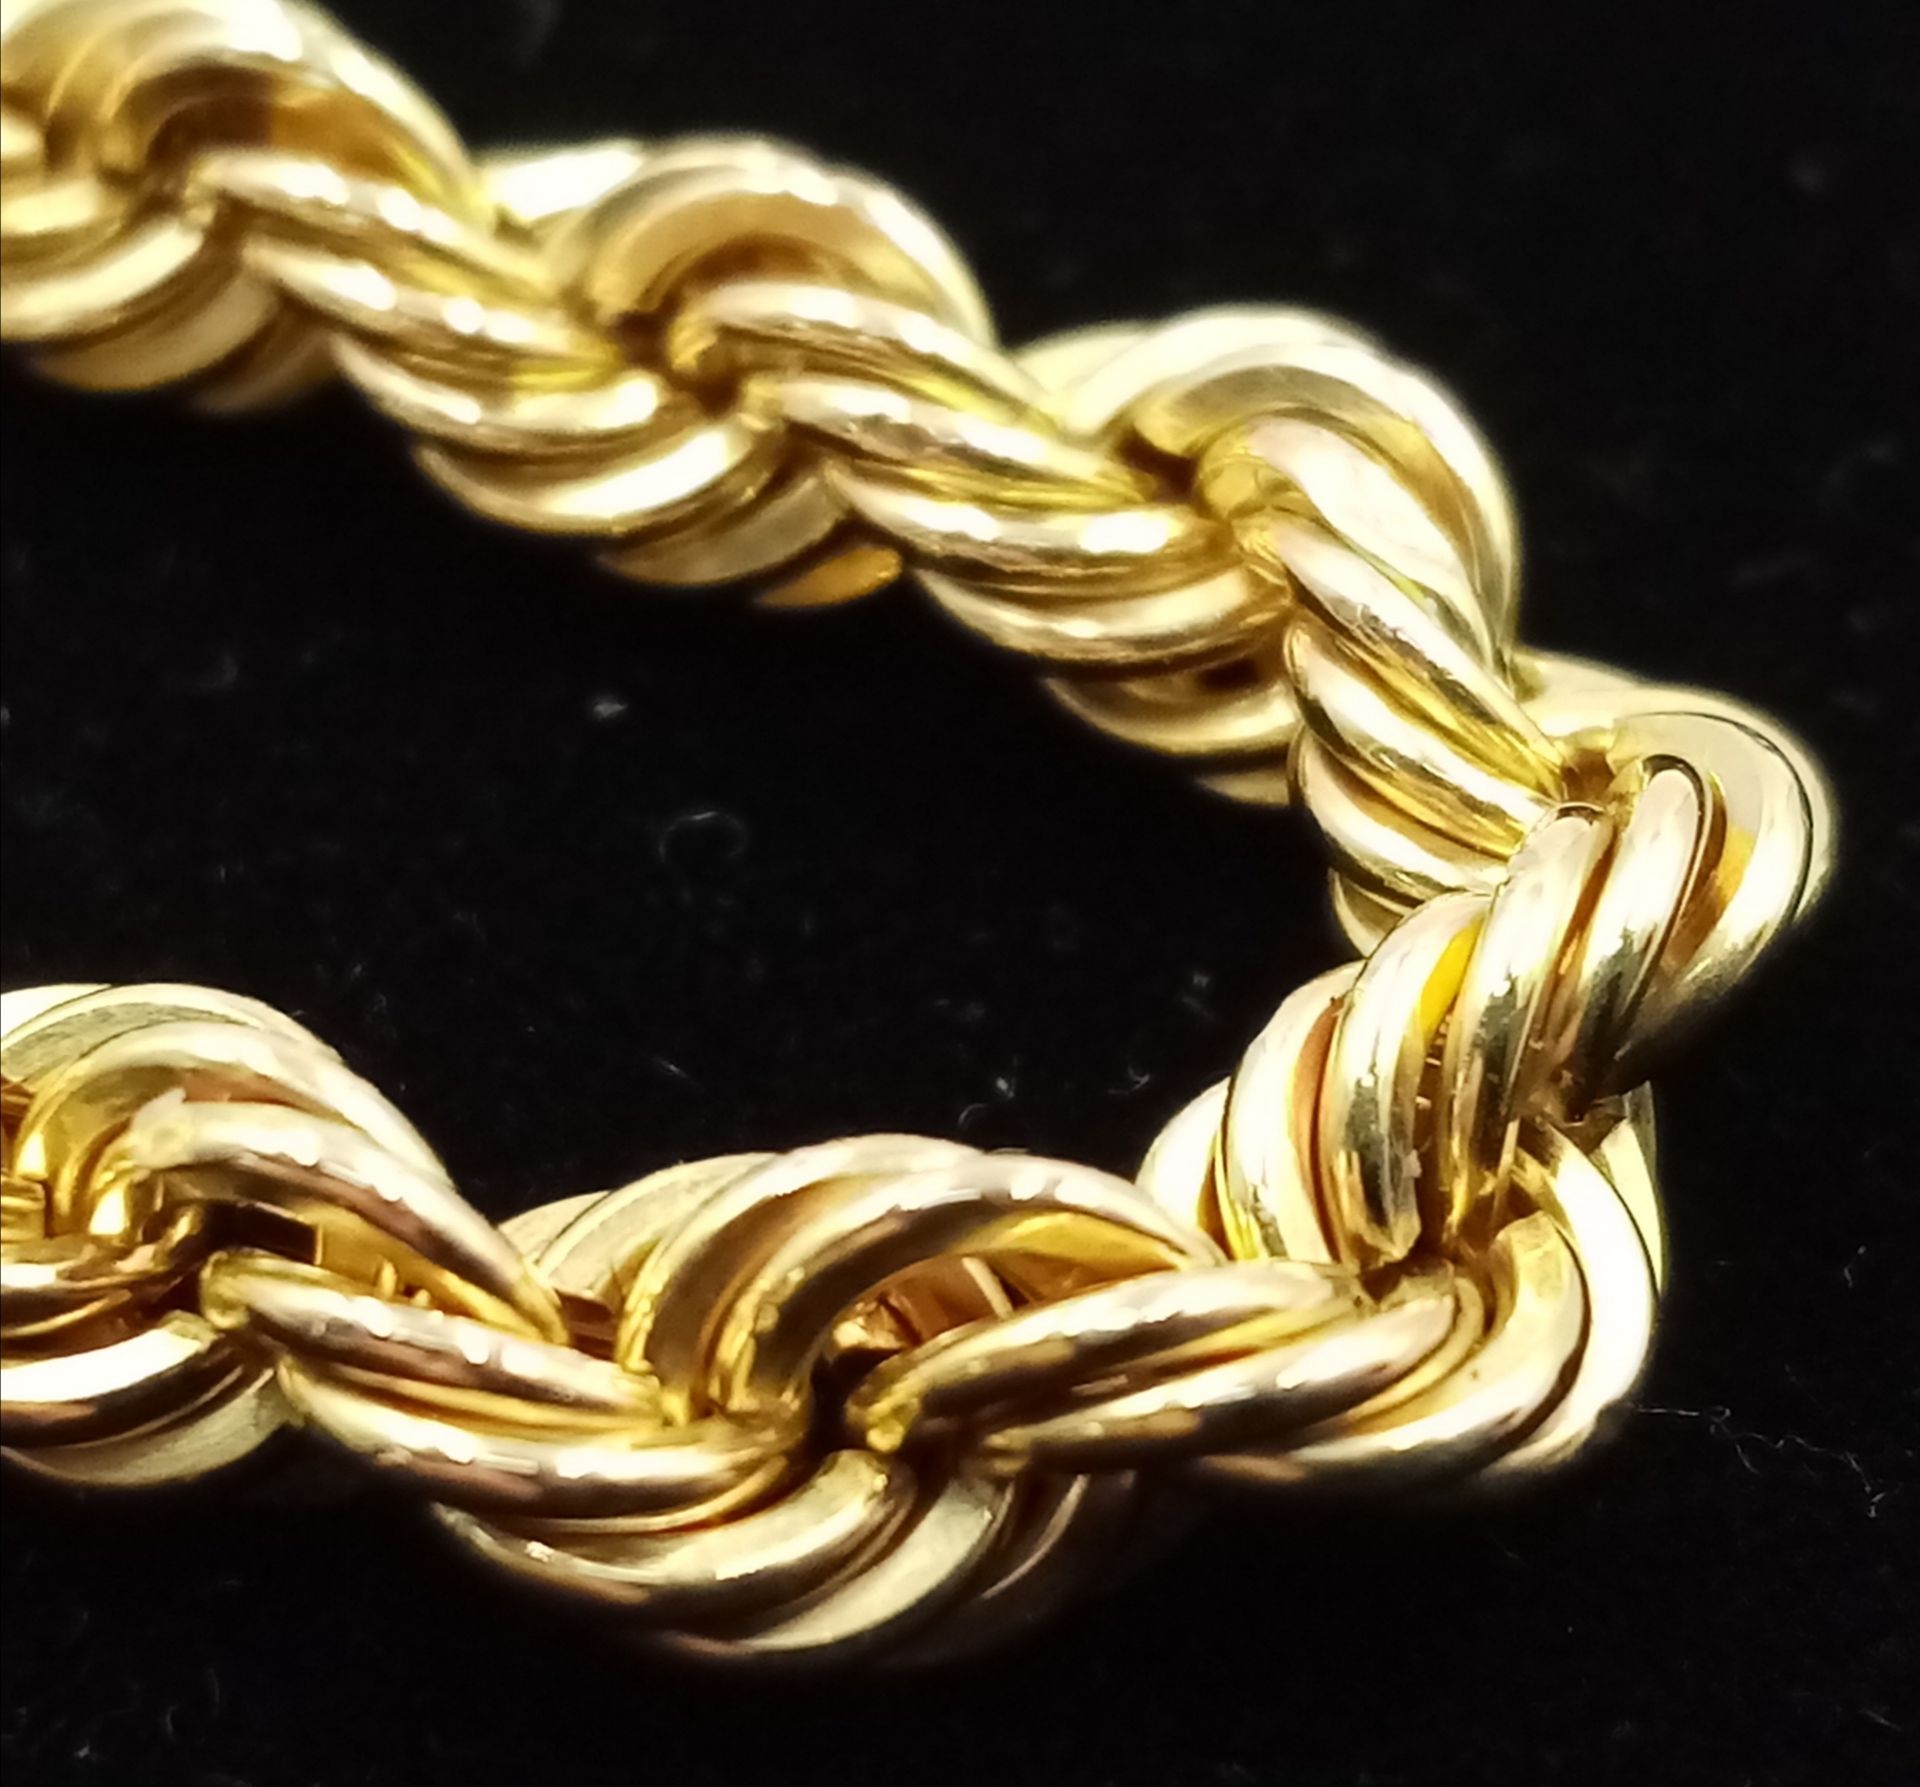 A 9K YELLOW GOLD ROPE BRACELET. 20cm length, 3.1g weight. Ref: SC 8004 - Image 3 of 4